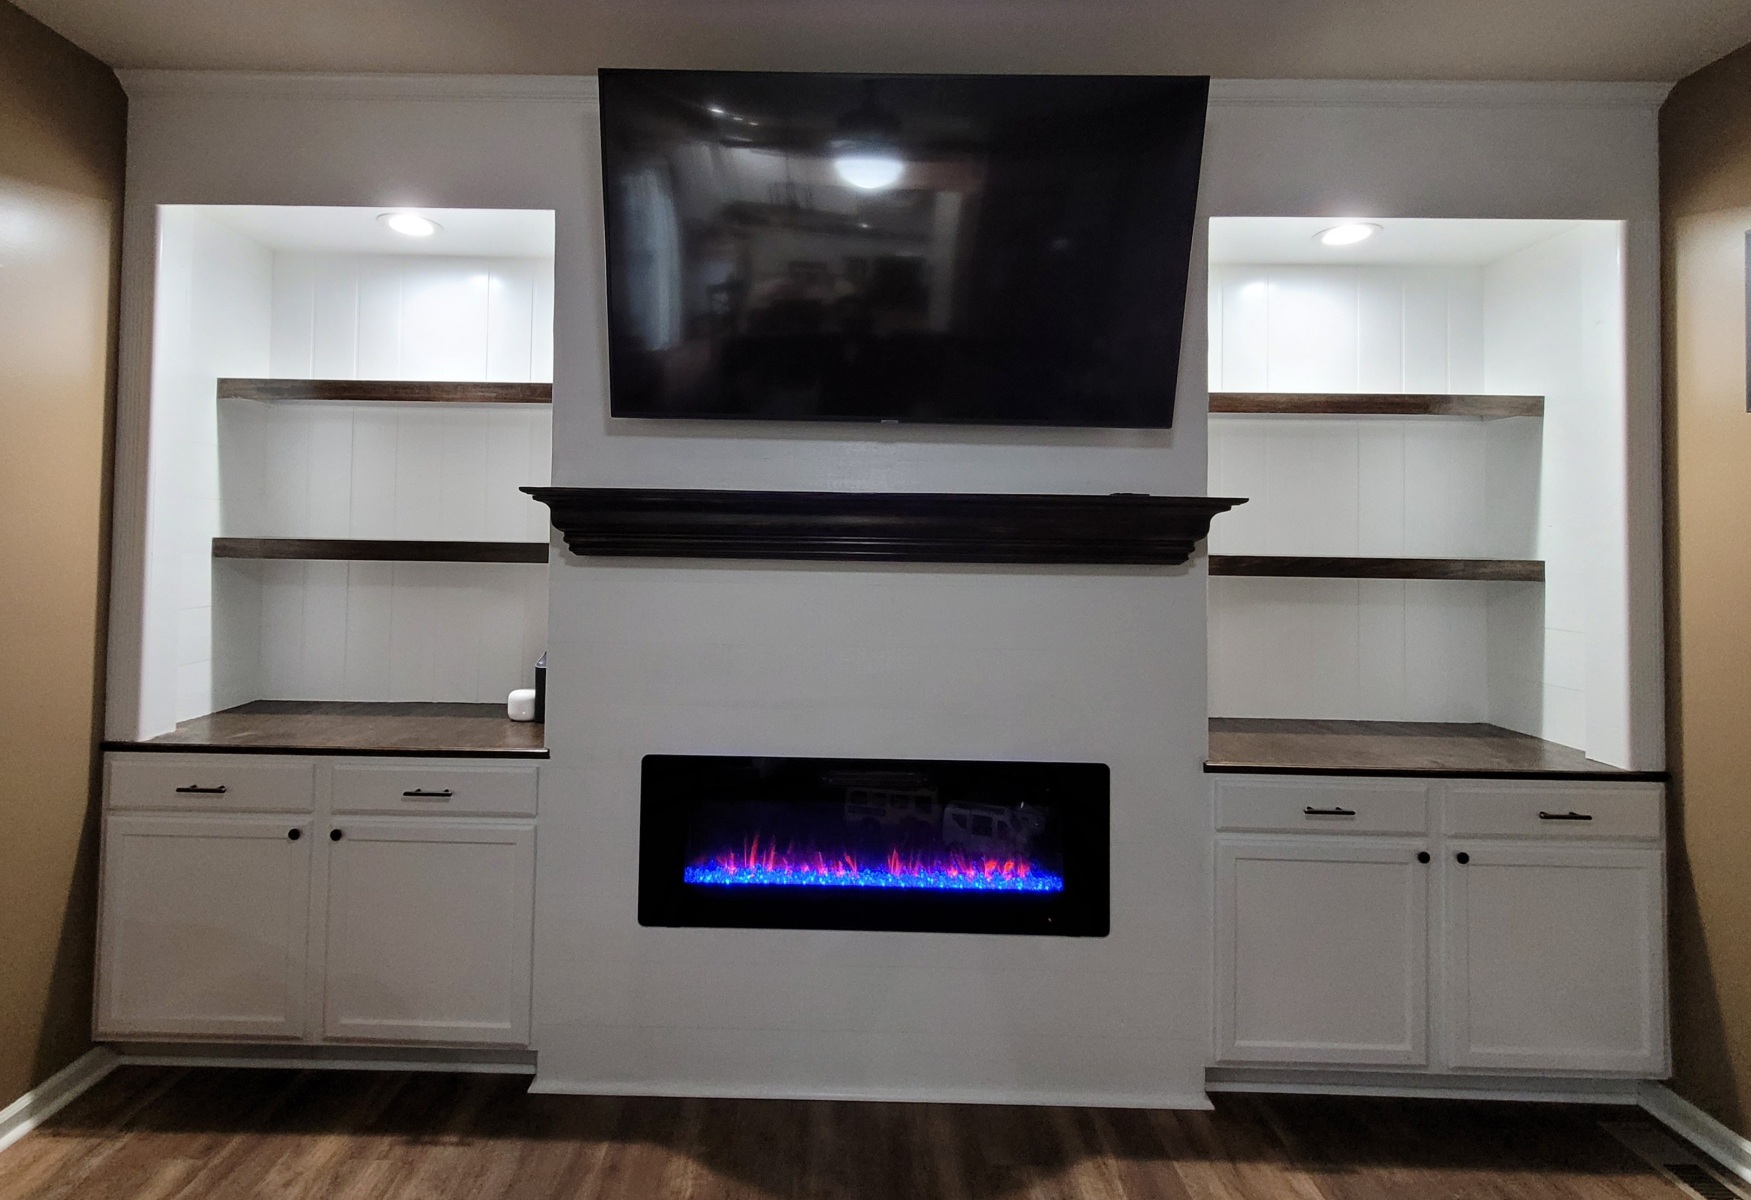 Custom built-in shelves, fireplace, and storage